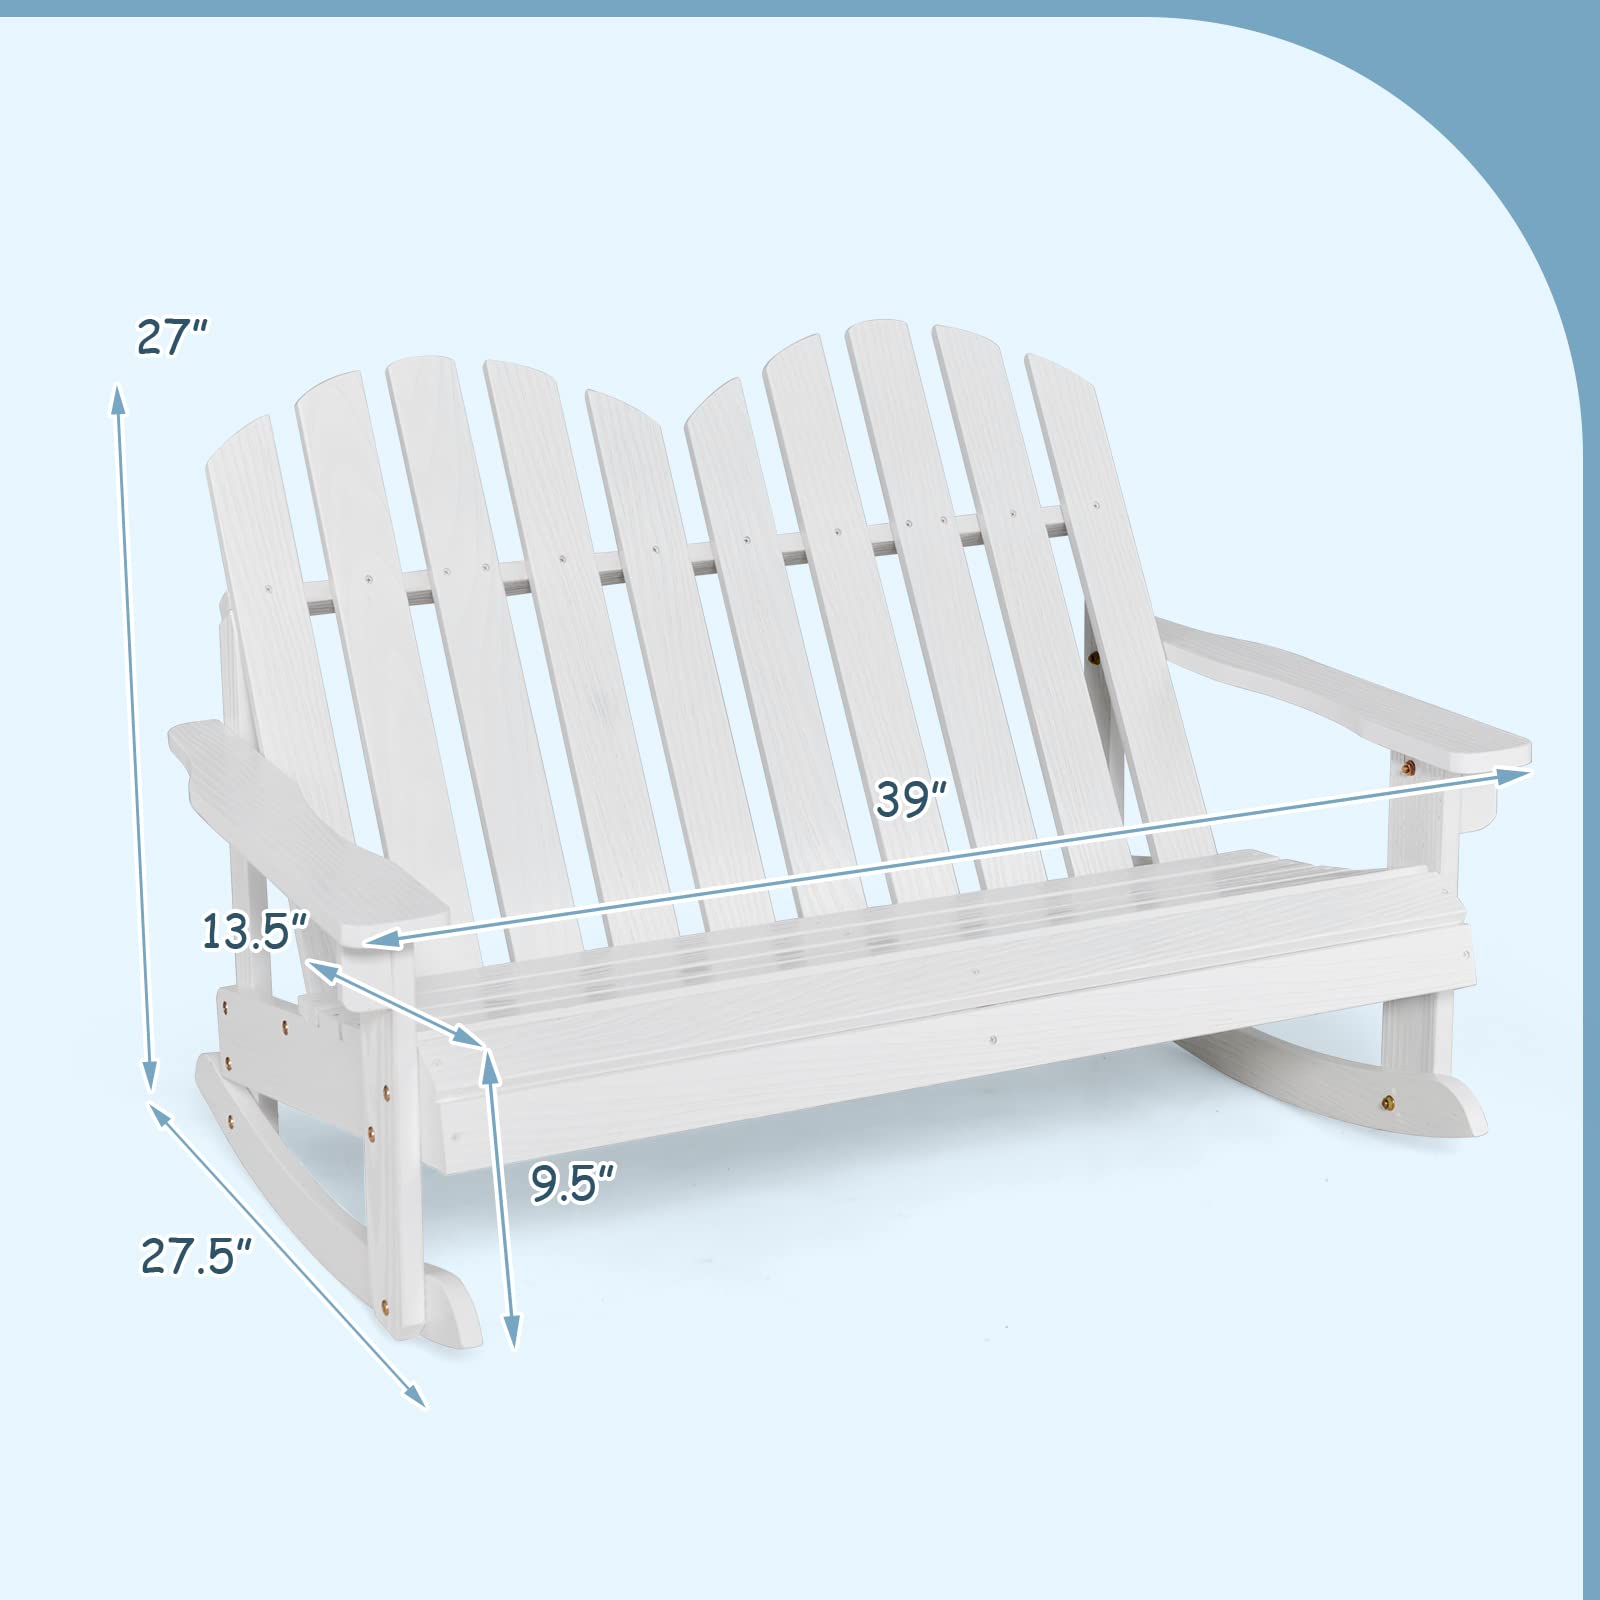 Giantex 2-Person Adirondack Rocking Chair - Kids Outdoor Rocking Bench with Slatted Seat, High Backrest